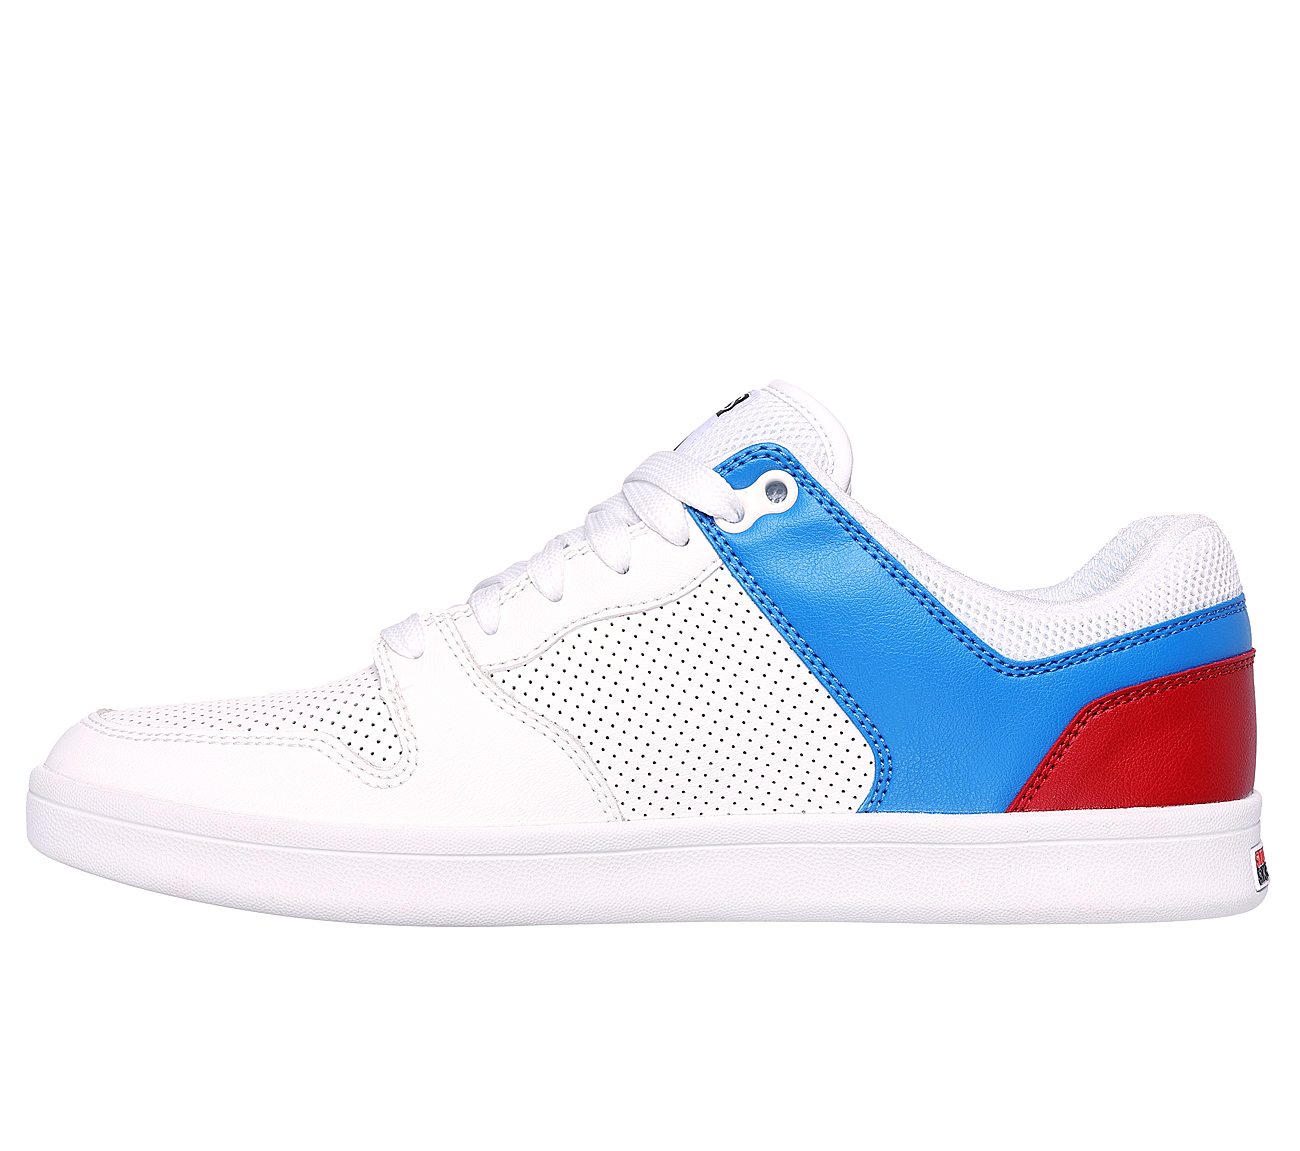 Rolling Stones: Classic Cup - Euro Lick, WHITE/BLUE/RED Footwear Left View